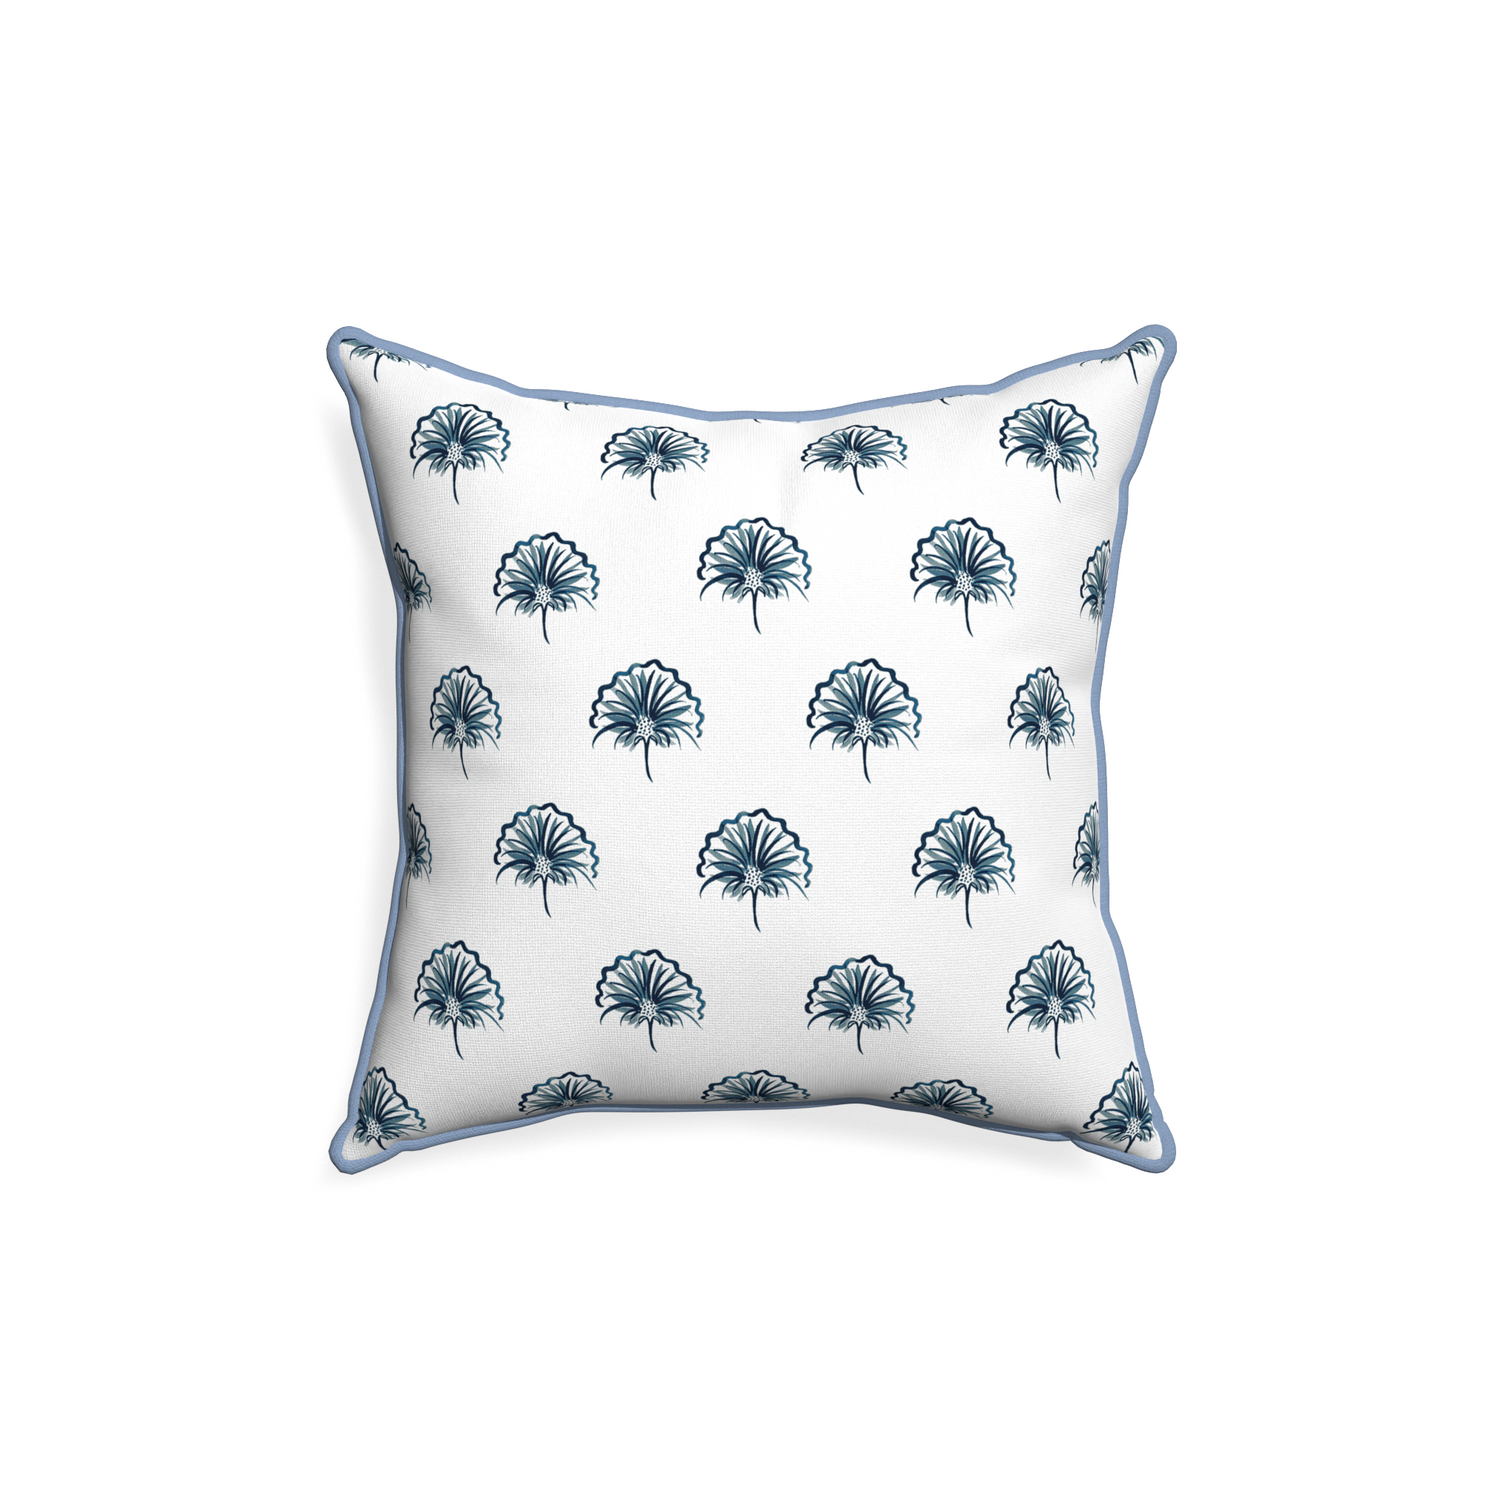 18-square penelope midnight custom pillow with sky piping on white background